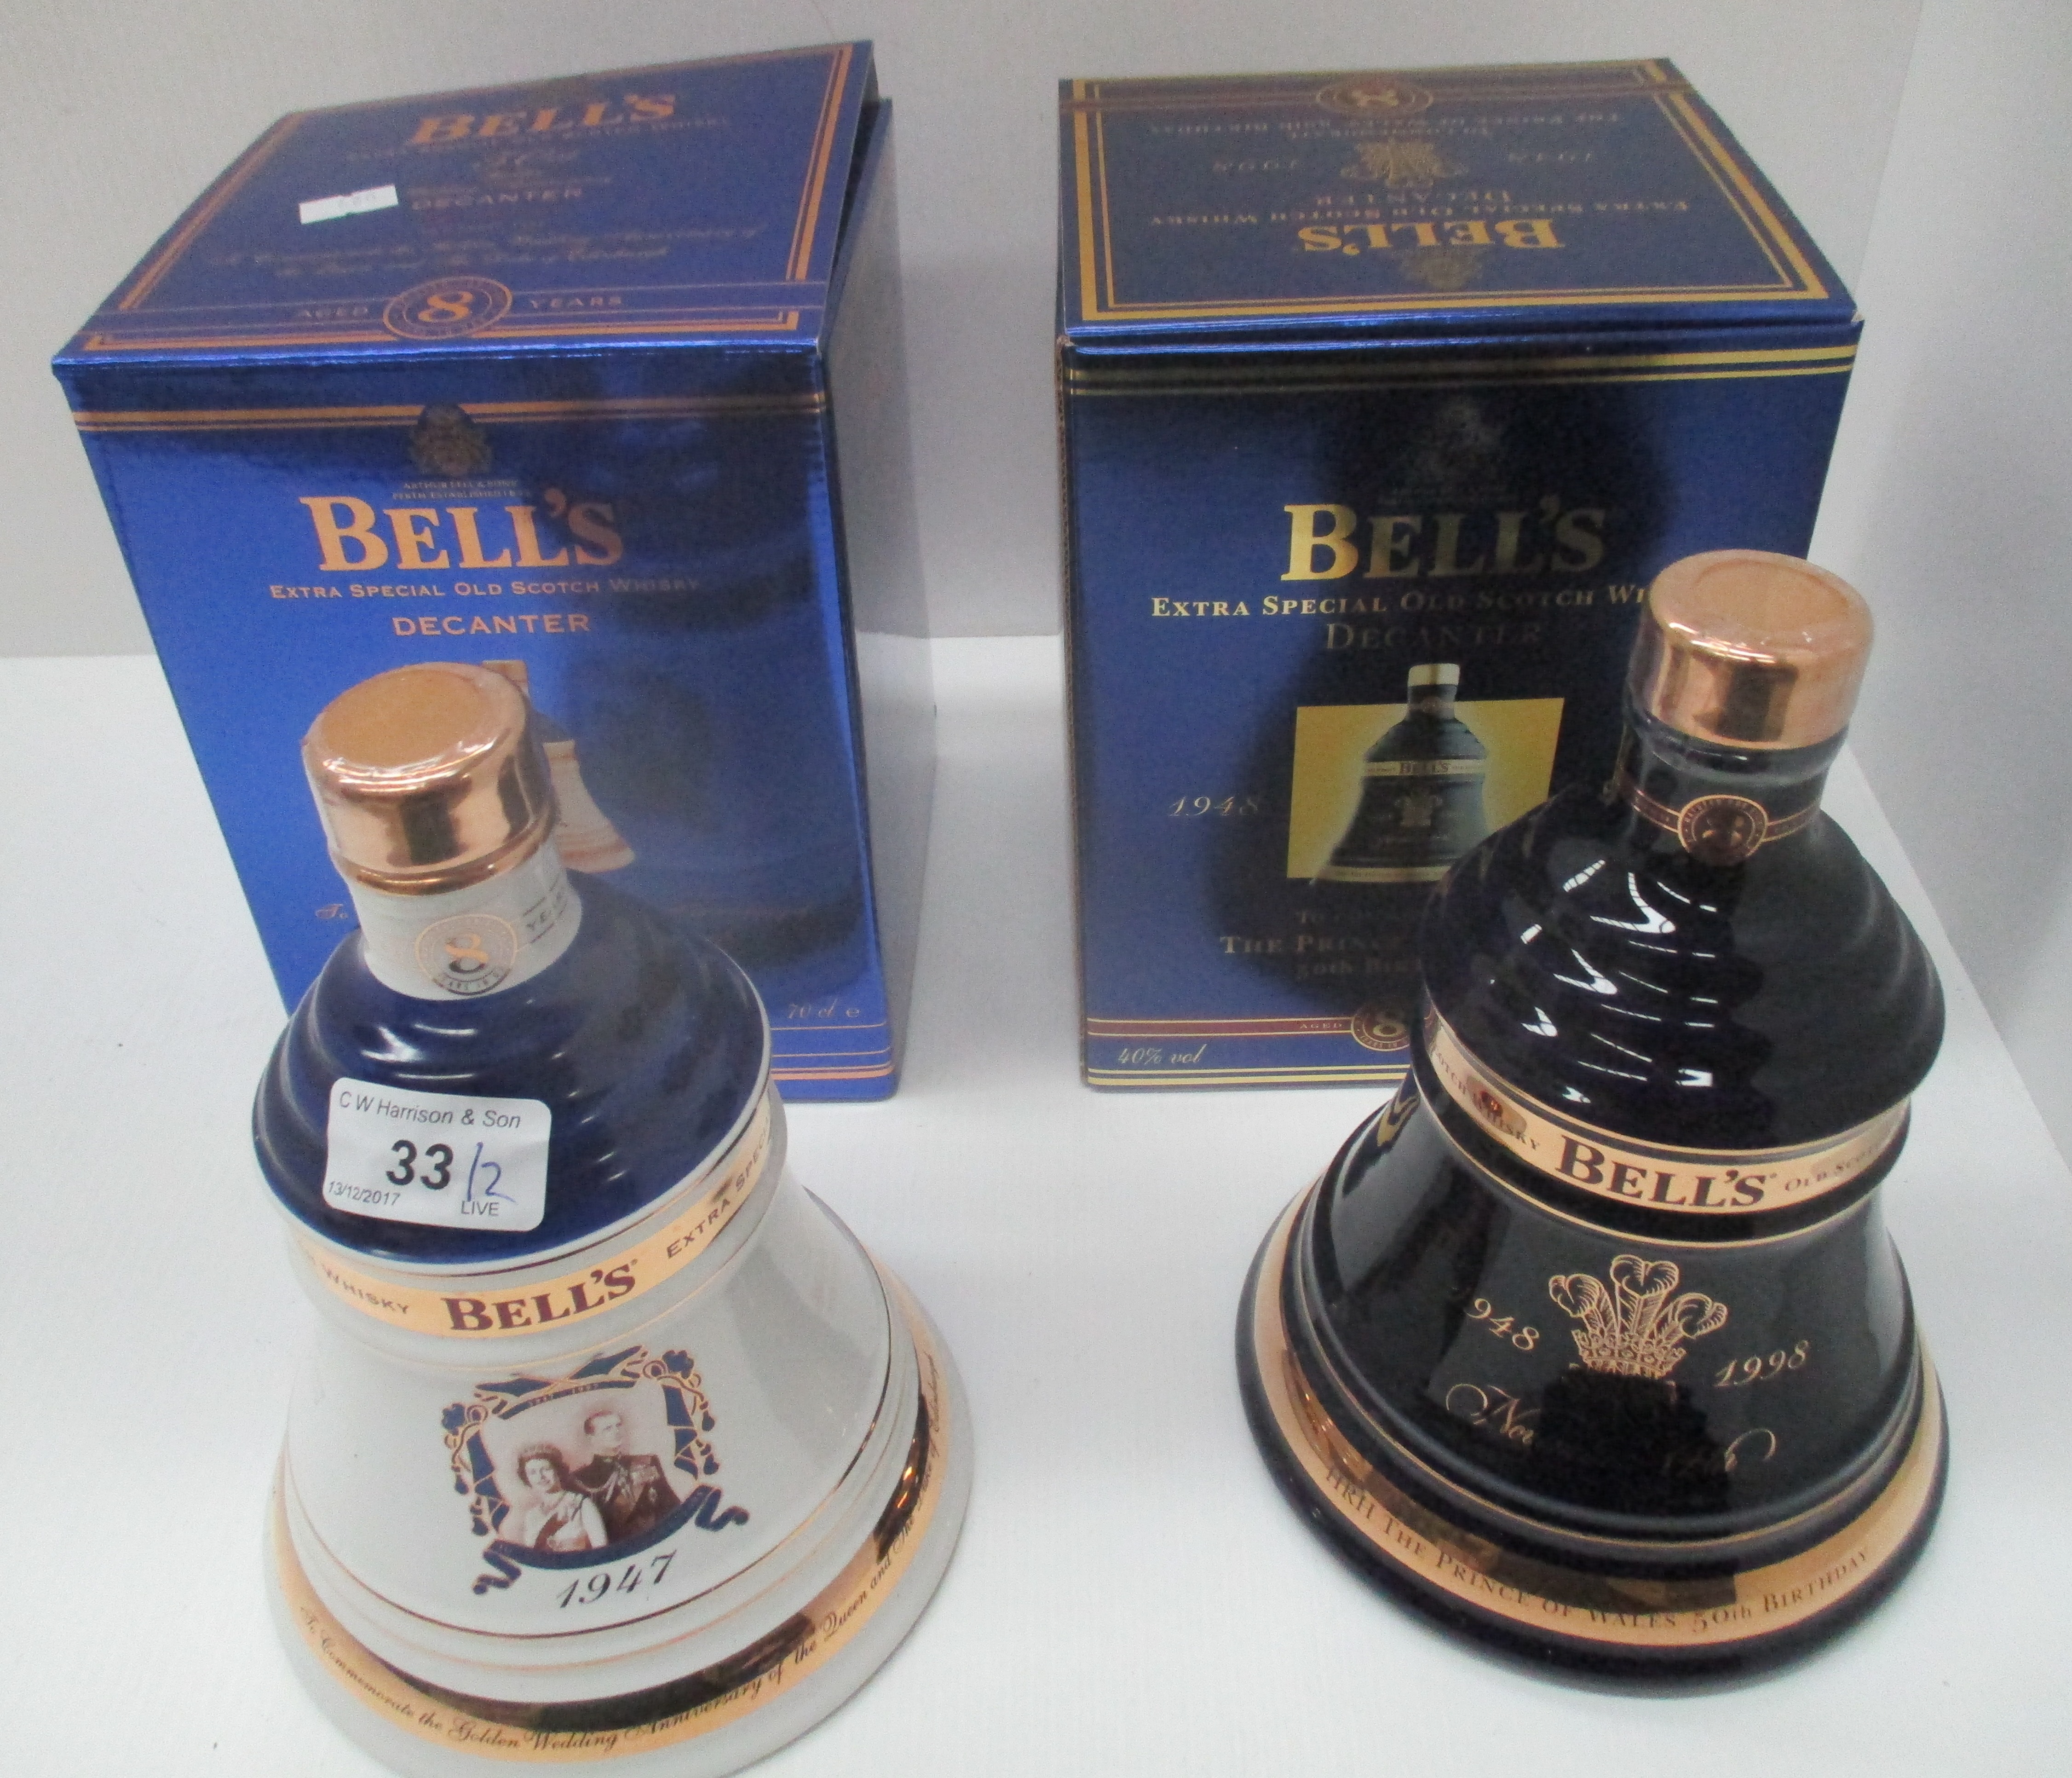 2 x 70cl Wade commemorative porcelain decanters for Bell's containing Bell's Old Scotch whisky